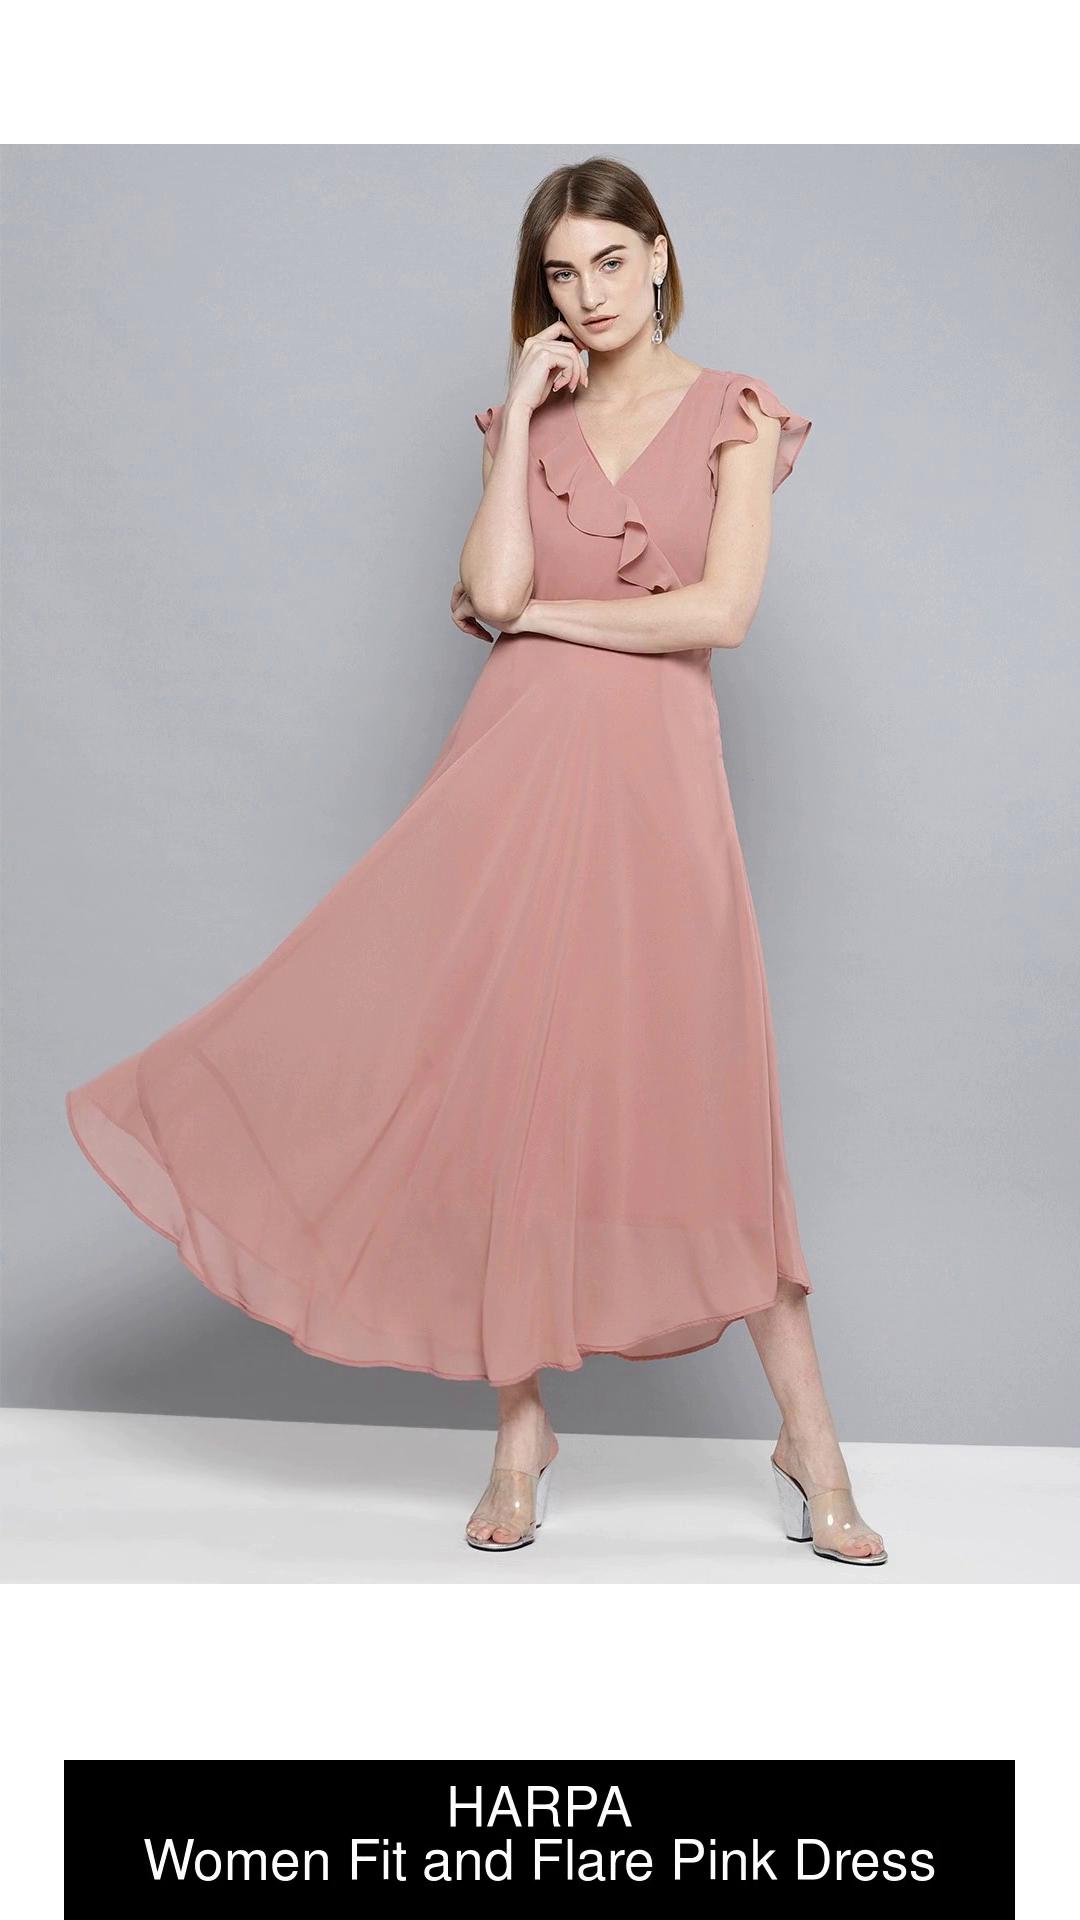 HARPA Women Fit and Flare Pink Dress - Buy HARPA Women Fit and Flare Pink  Dress Online at Best Prices in India